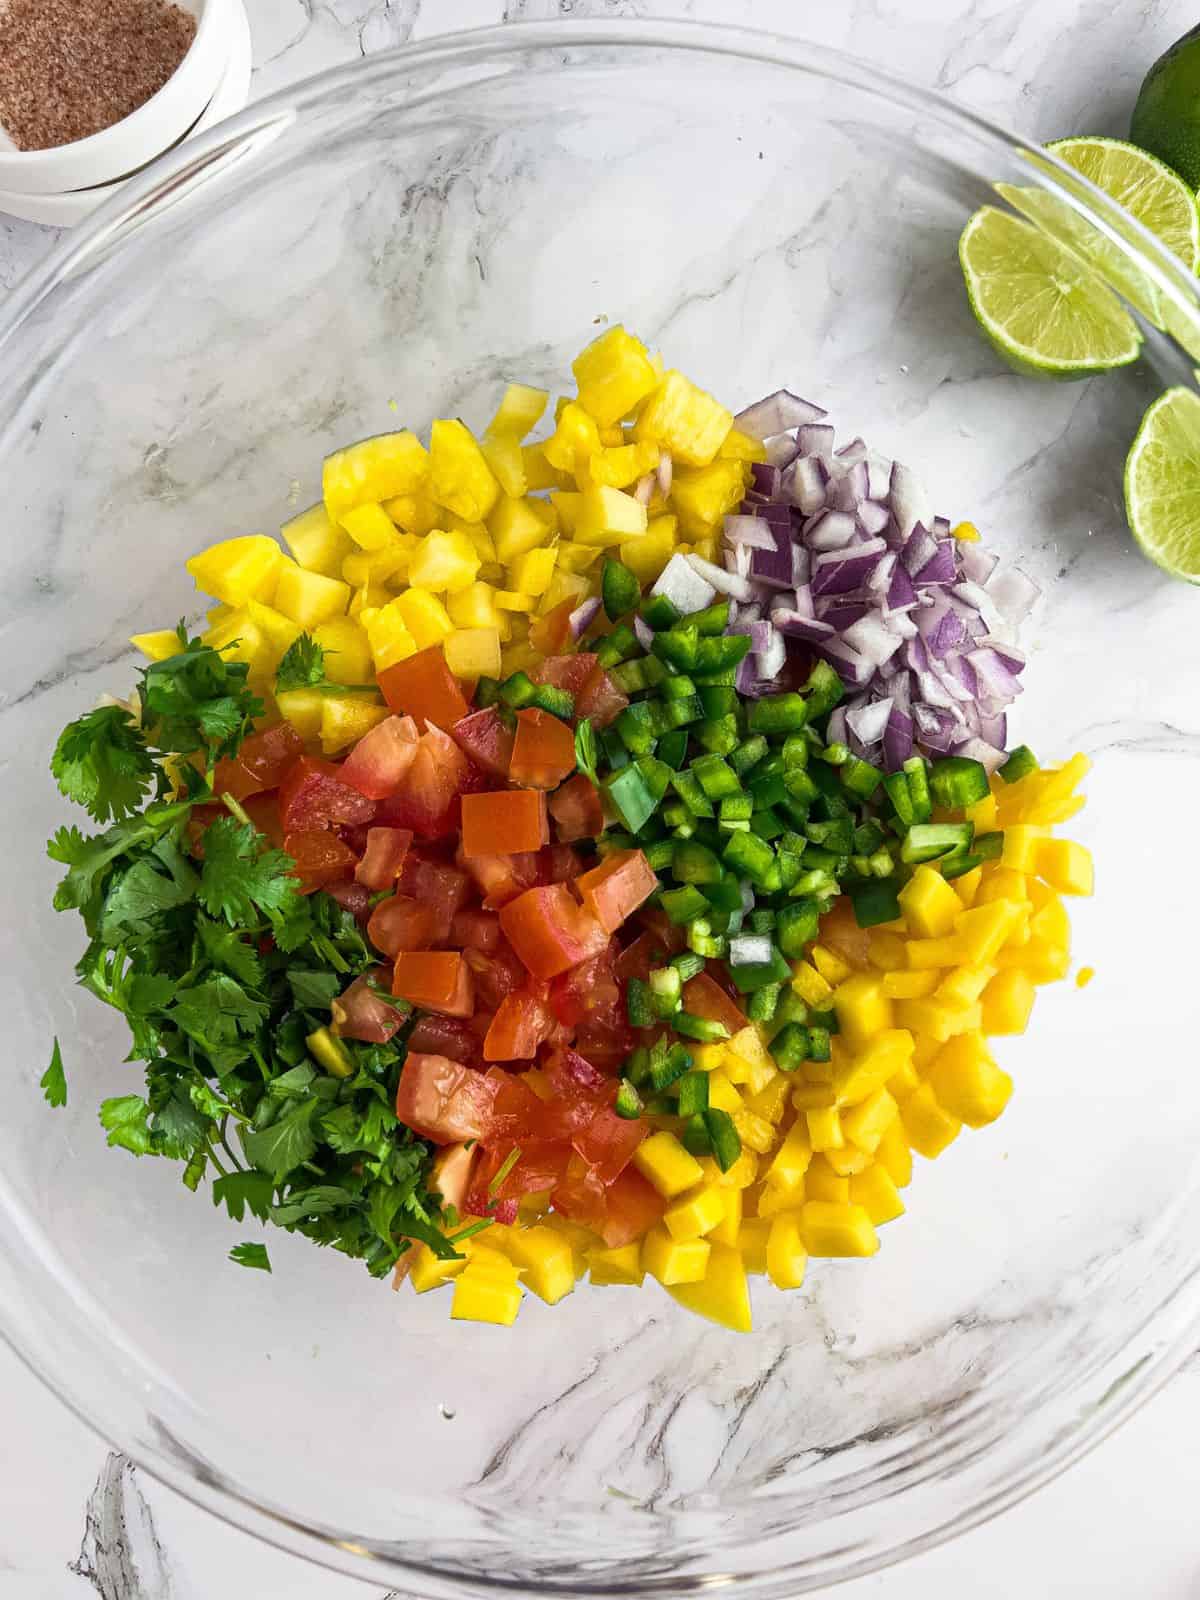 Chopped ingredients of mango pineapple pico de gallo salsa in a bowl.